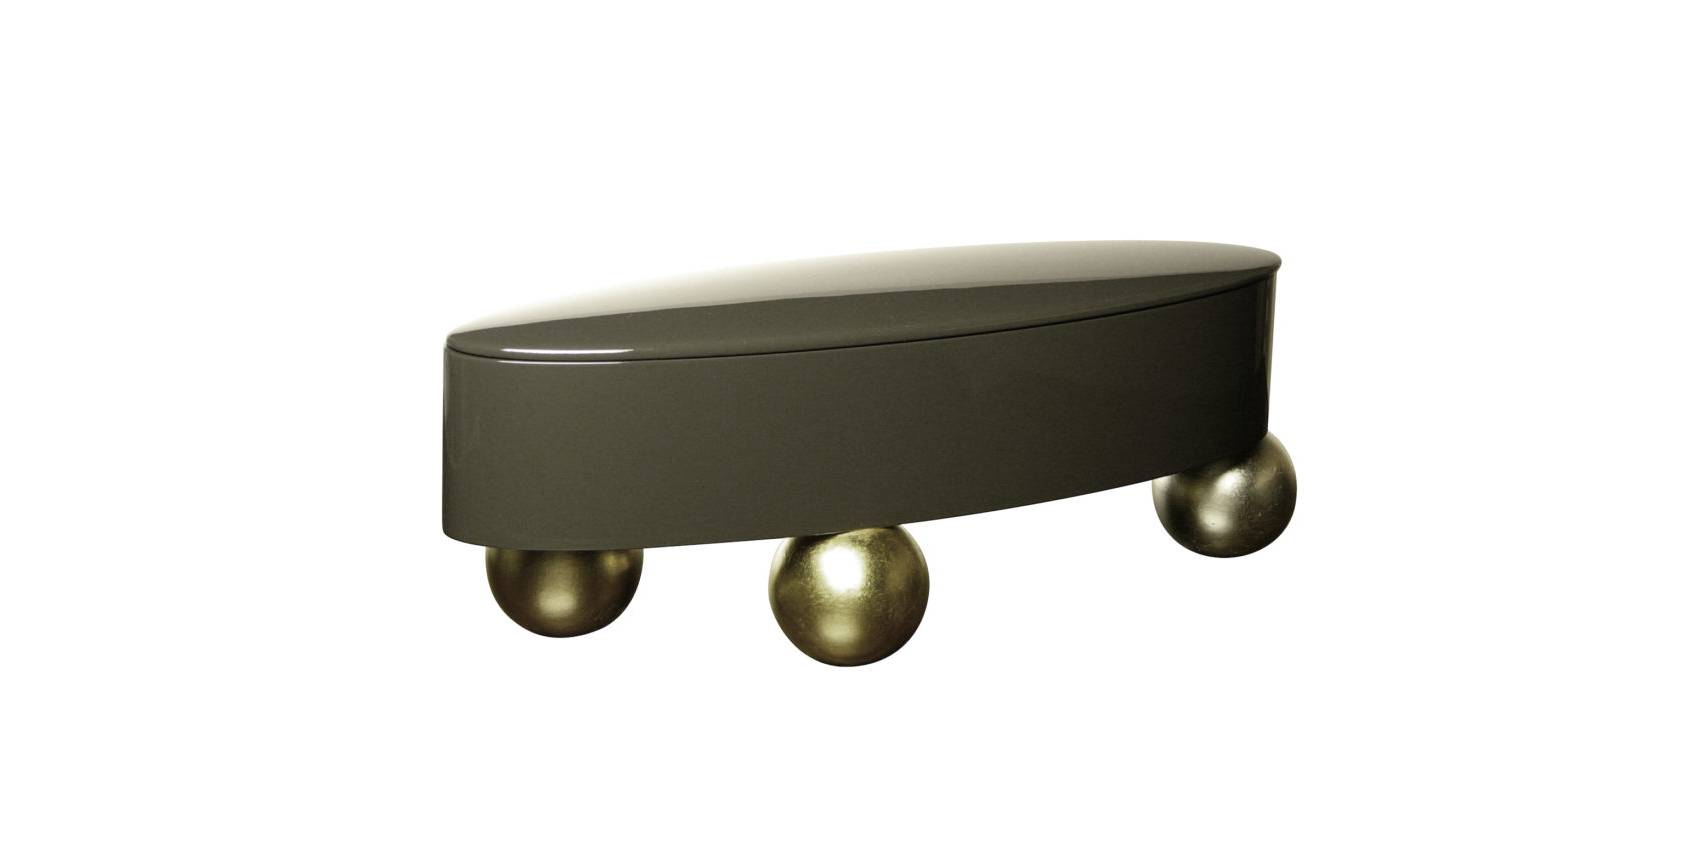 Andrée Putman, oval box in lacquered grey wood, 3 round legs in gold bronze